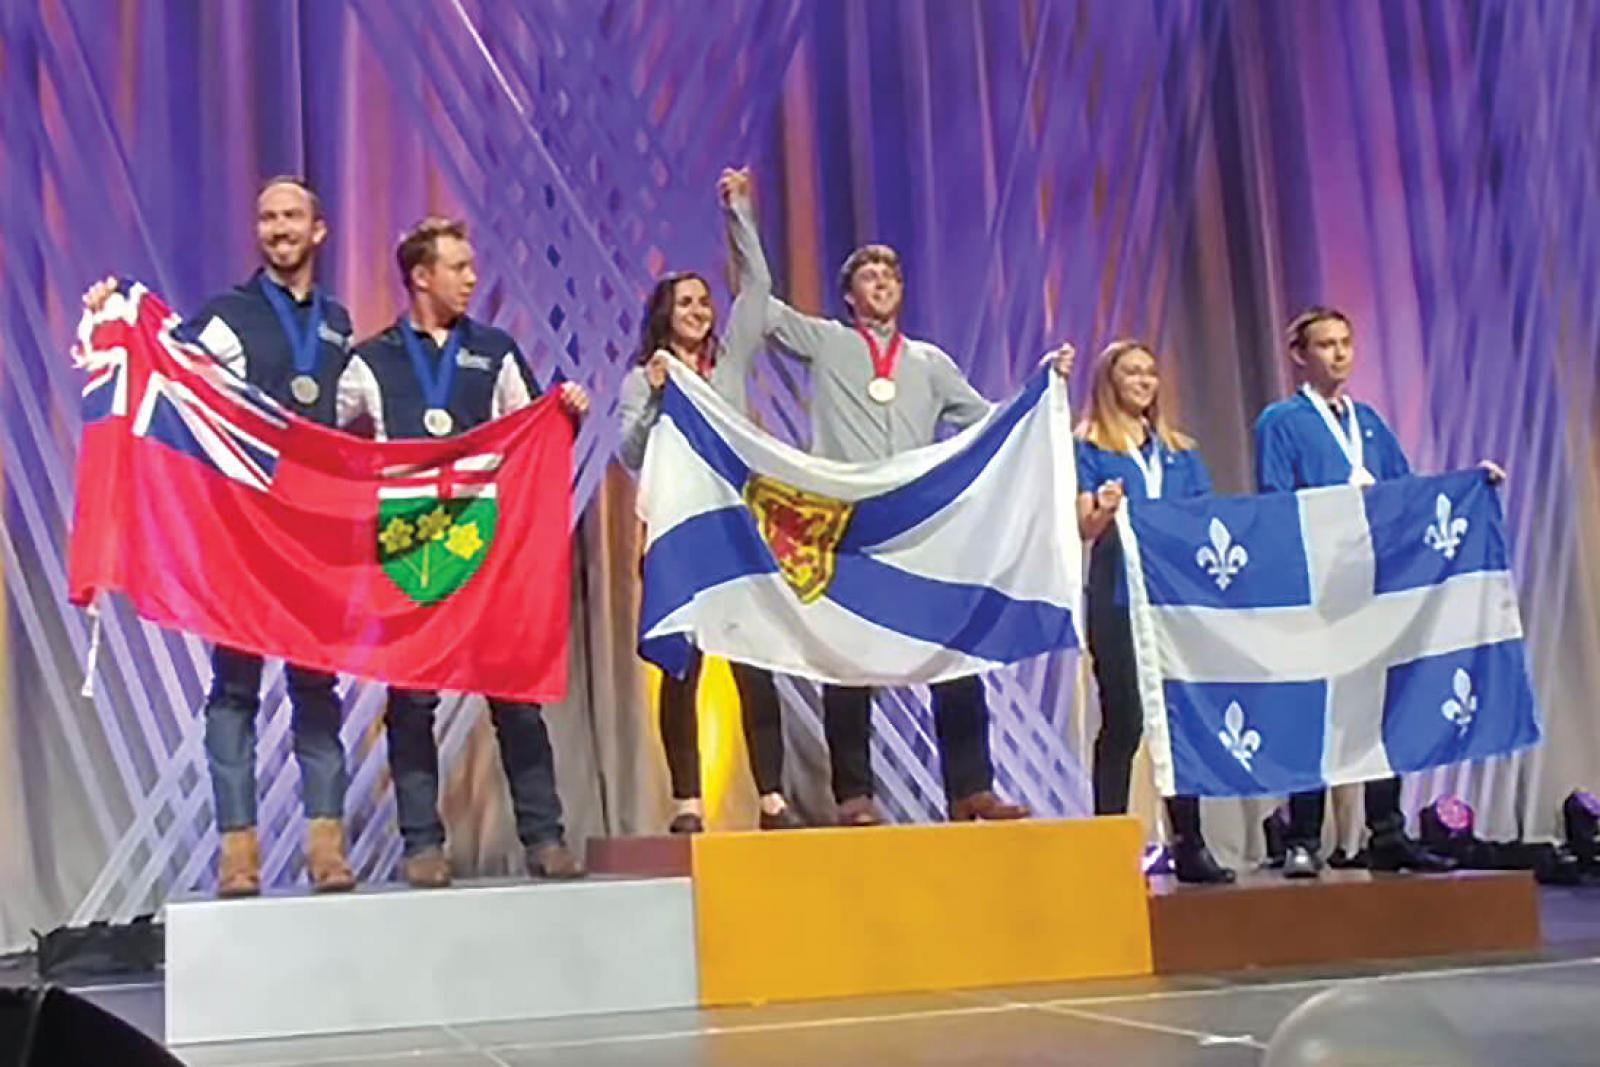 Algonquin College’s Blaise Mombourquett (far left) and Thomas Hawley hold the Ontario flag atop the silver podium at Skills Canada 2018 in Edmonton, Alta.